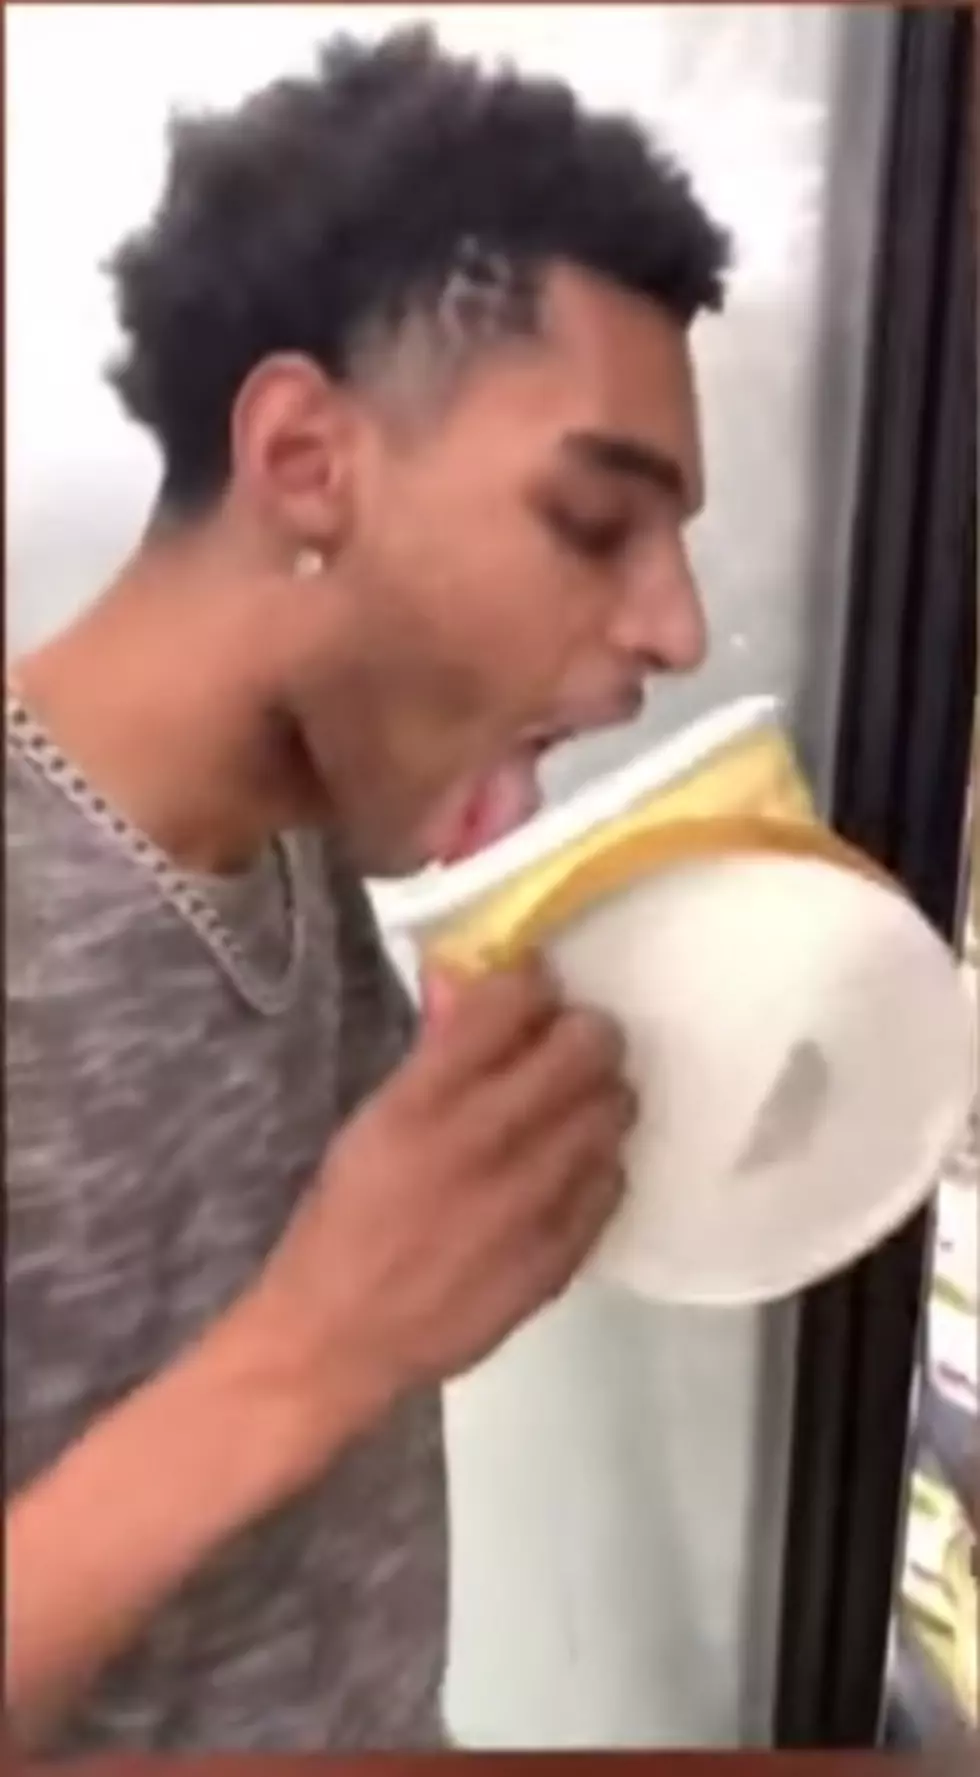 Texas Man recorded licking Blue Bell Ice Cream..yes another person